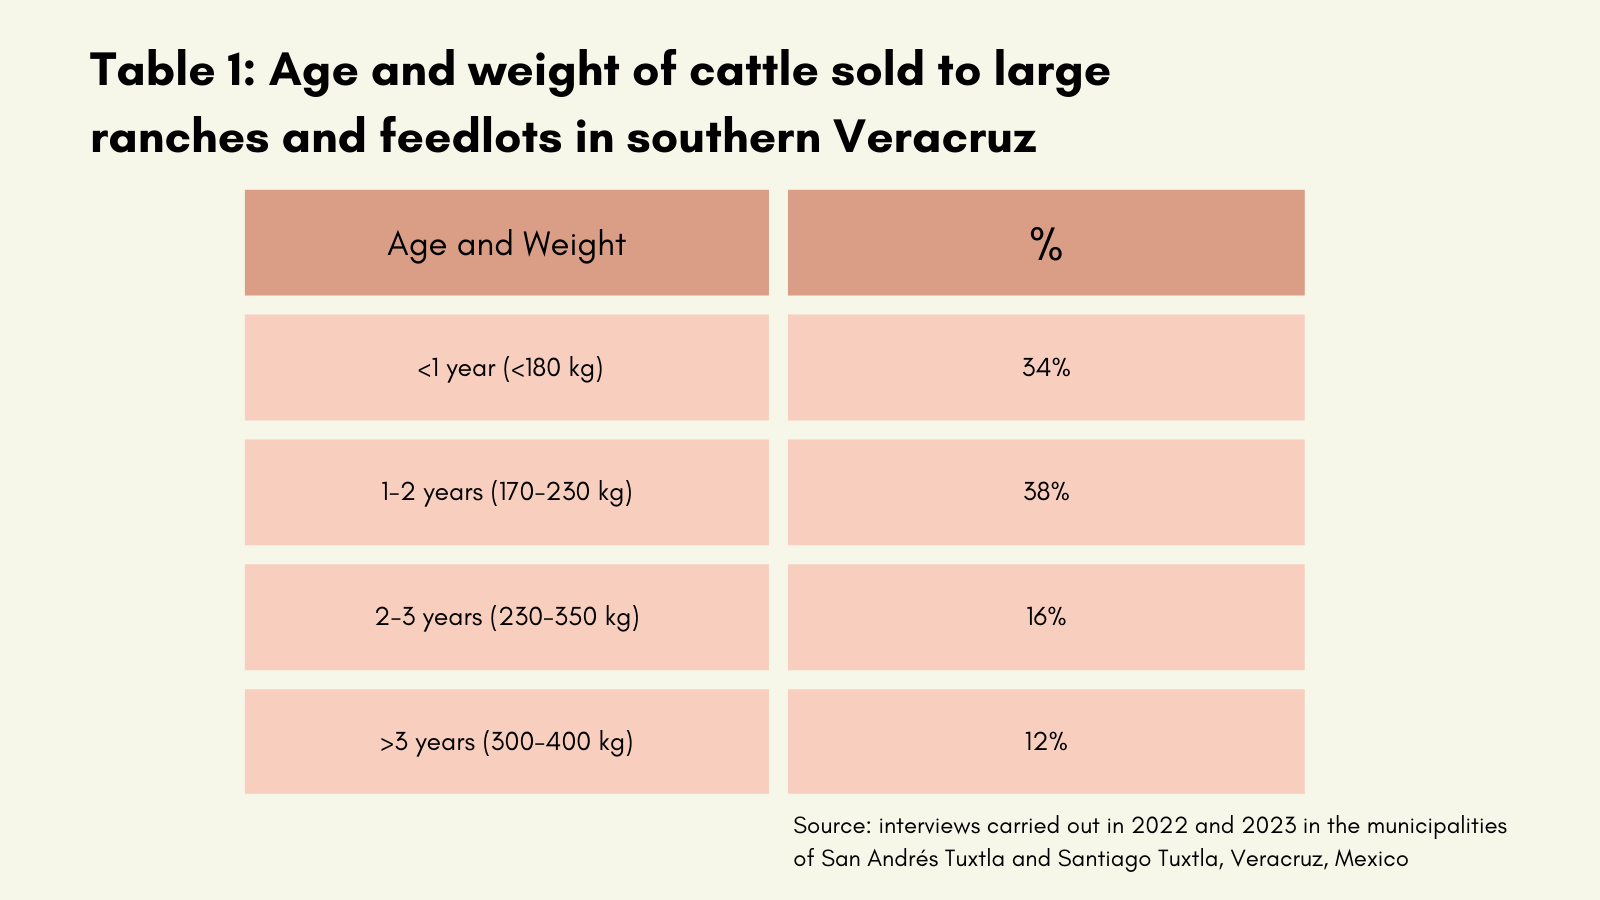 Table 1. Age and weight of cattle sold to large ranches and feedlots in southern Veracruz. Source: interviews carried out in 2022 and 2023 in the municipalities of San Andrés Tuxtla and Santiago Tuxtla, Veracruz, Mexico.